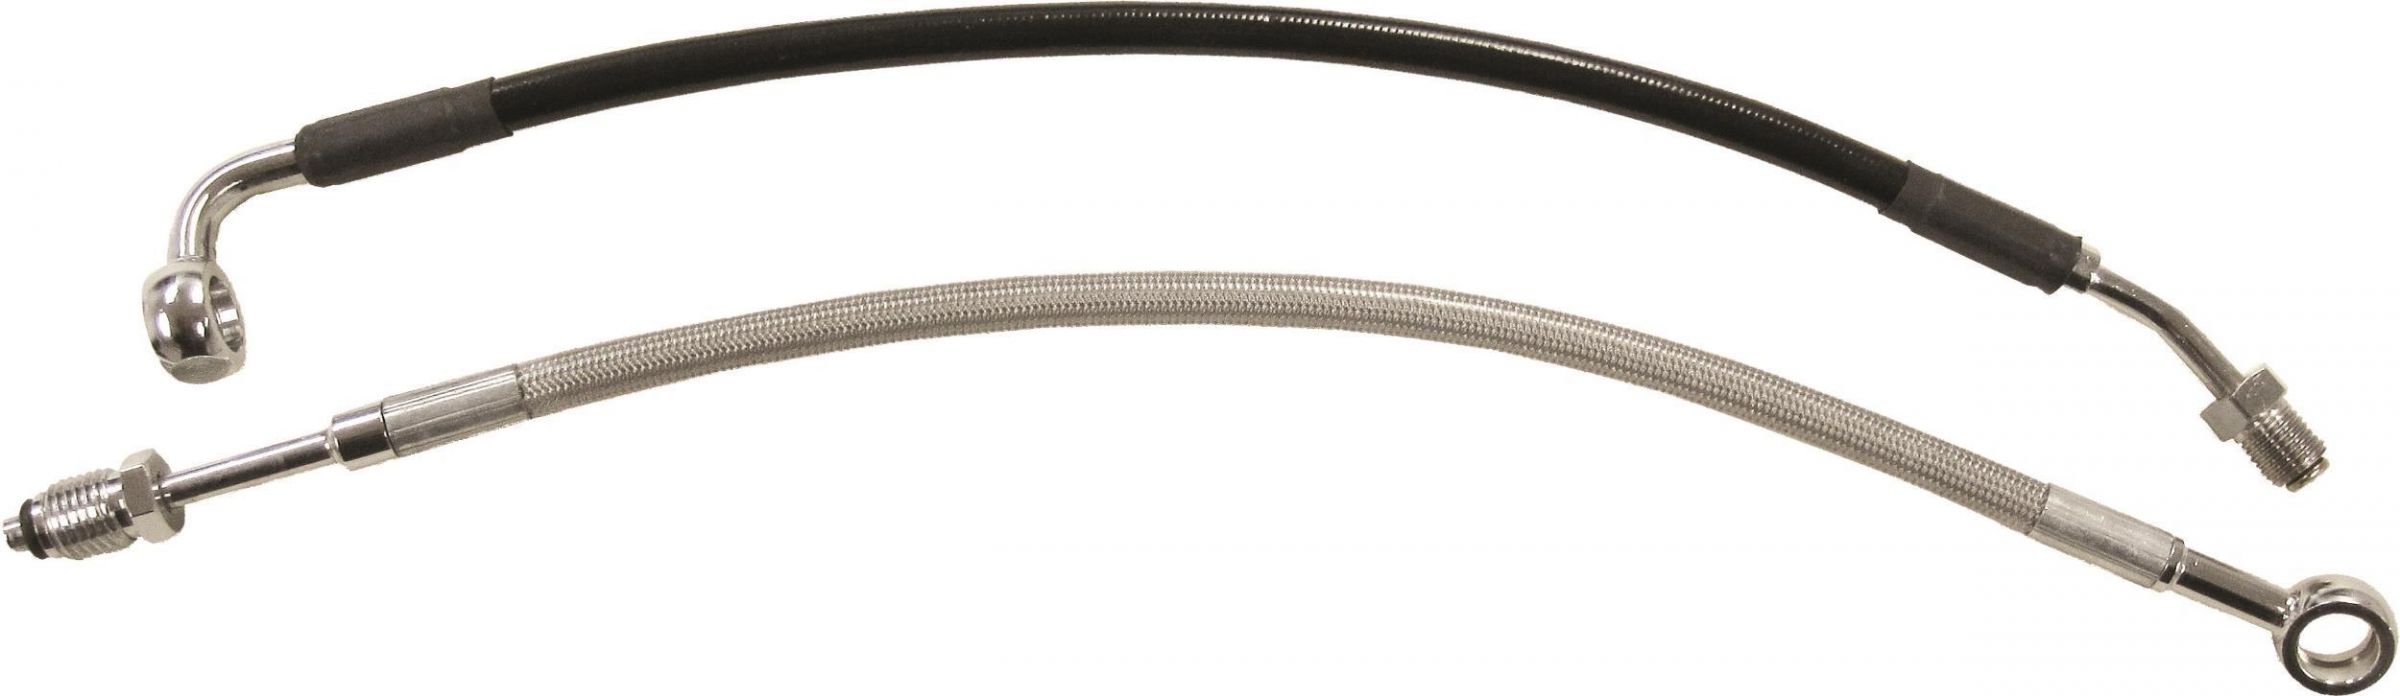 86OM-GOODRIDG-HD0006-1CCH-4 Stainless Steel Braided Hydraulic Clutch Line Kit - 4in. Over Stock - Clear Coated